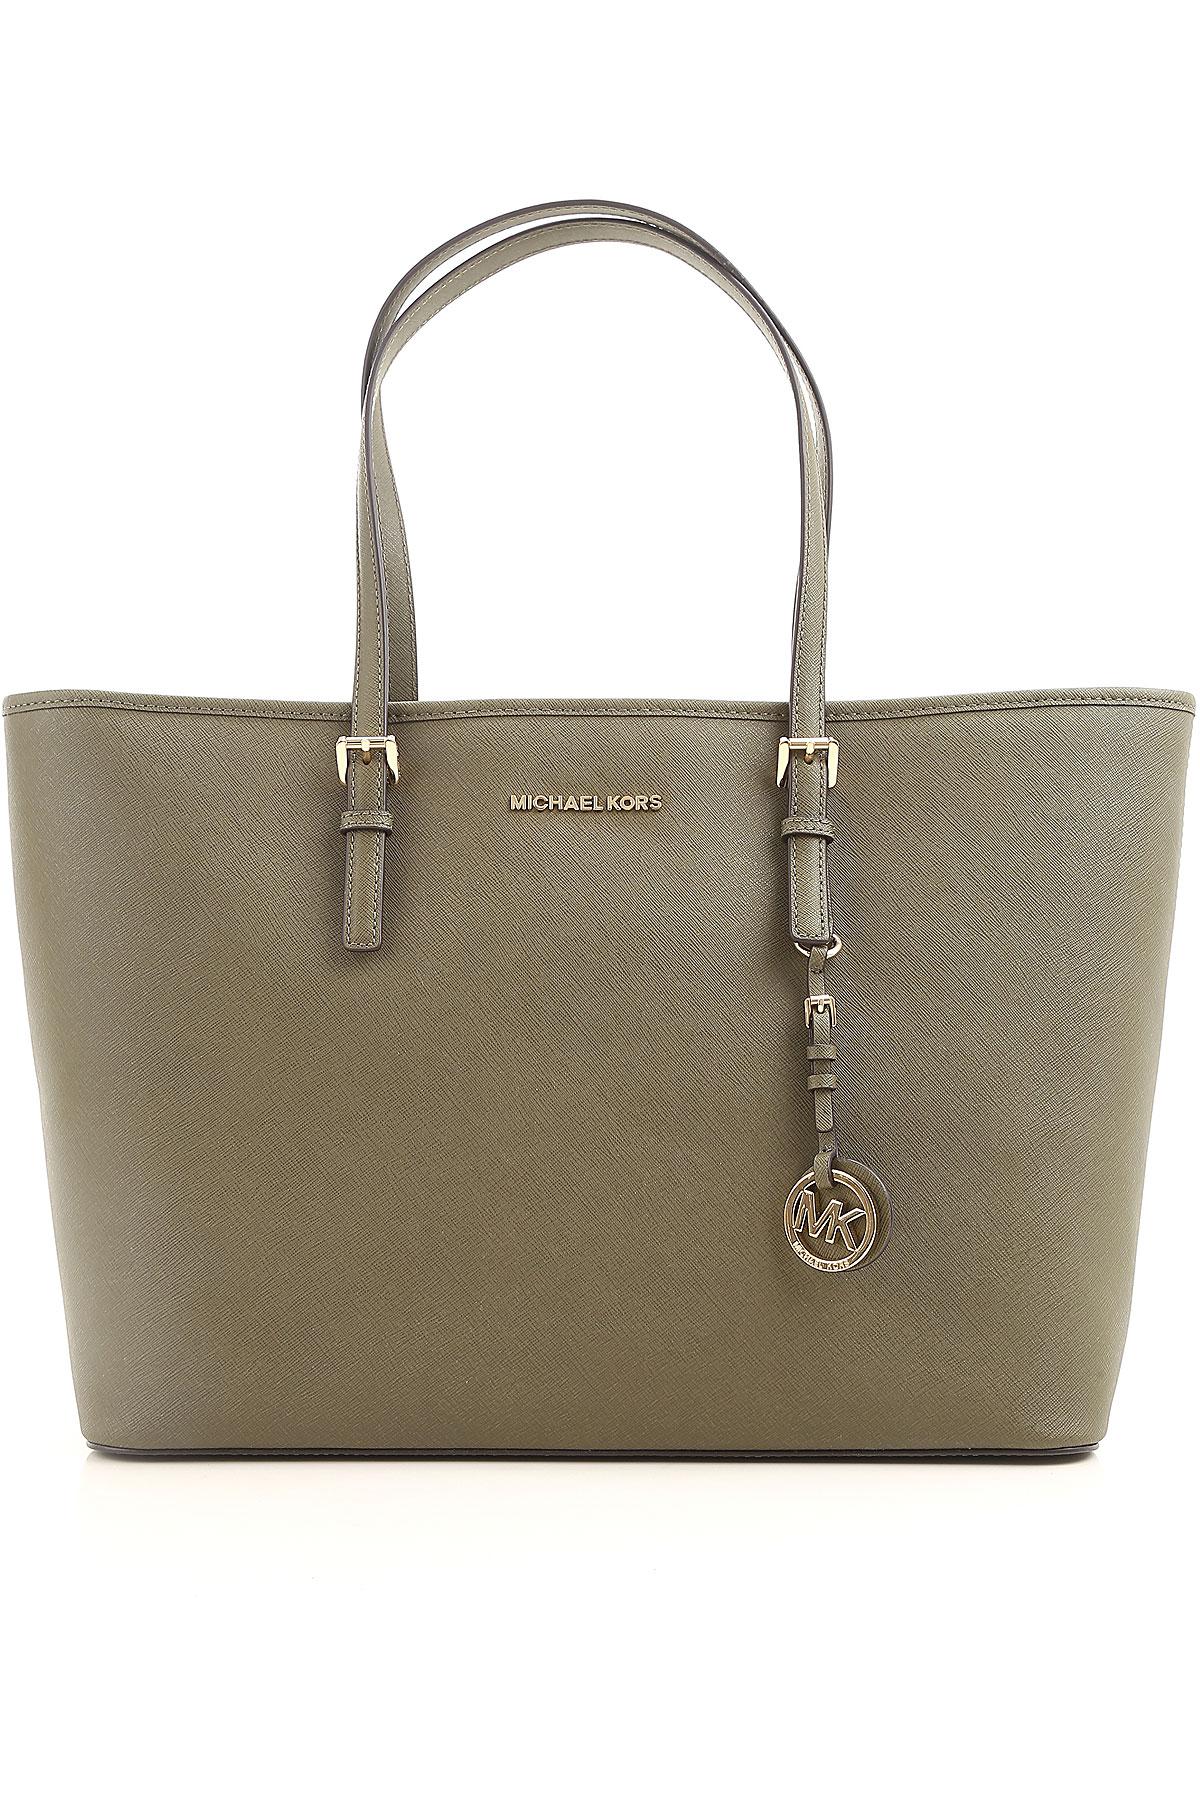 Michael Kors Leather Tote Bag On Sale In Outlet in Olive (Green) - Lyst